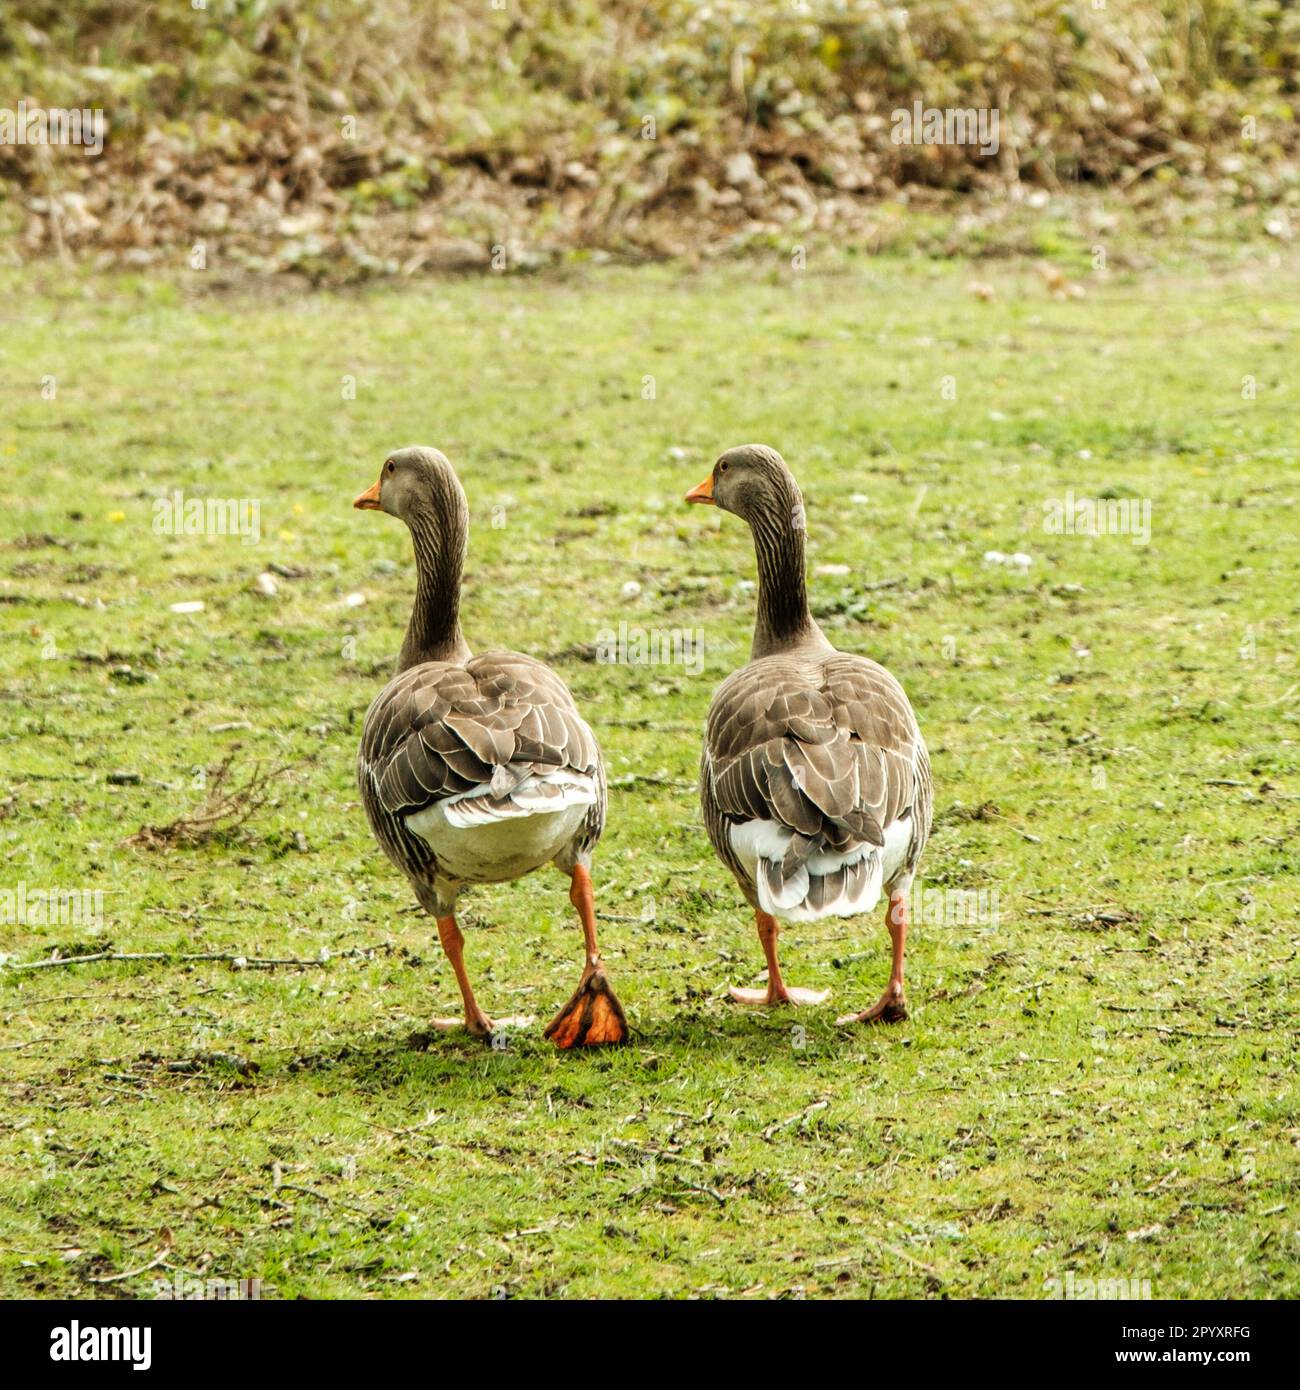 Two Wild Grey Geese Walking Together On A Grass Field With No People Stock Photo